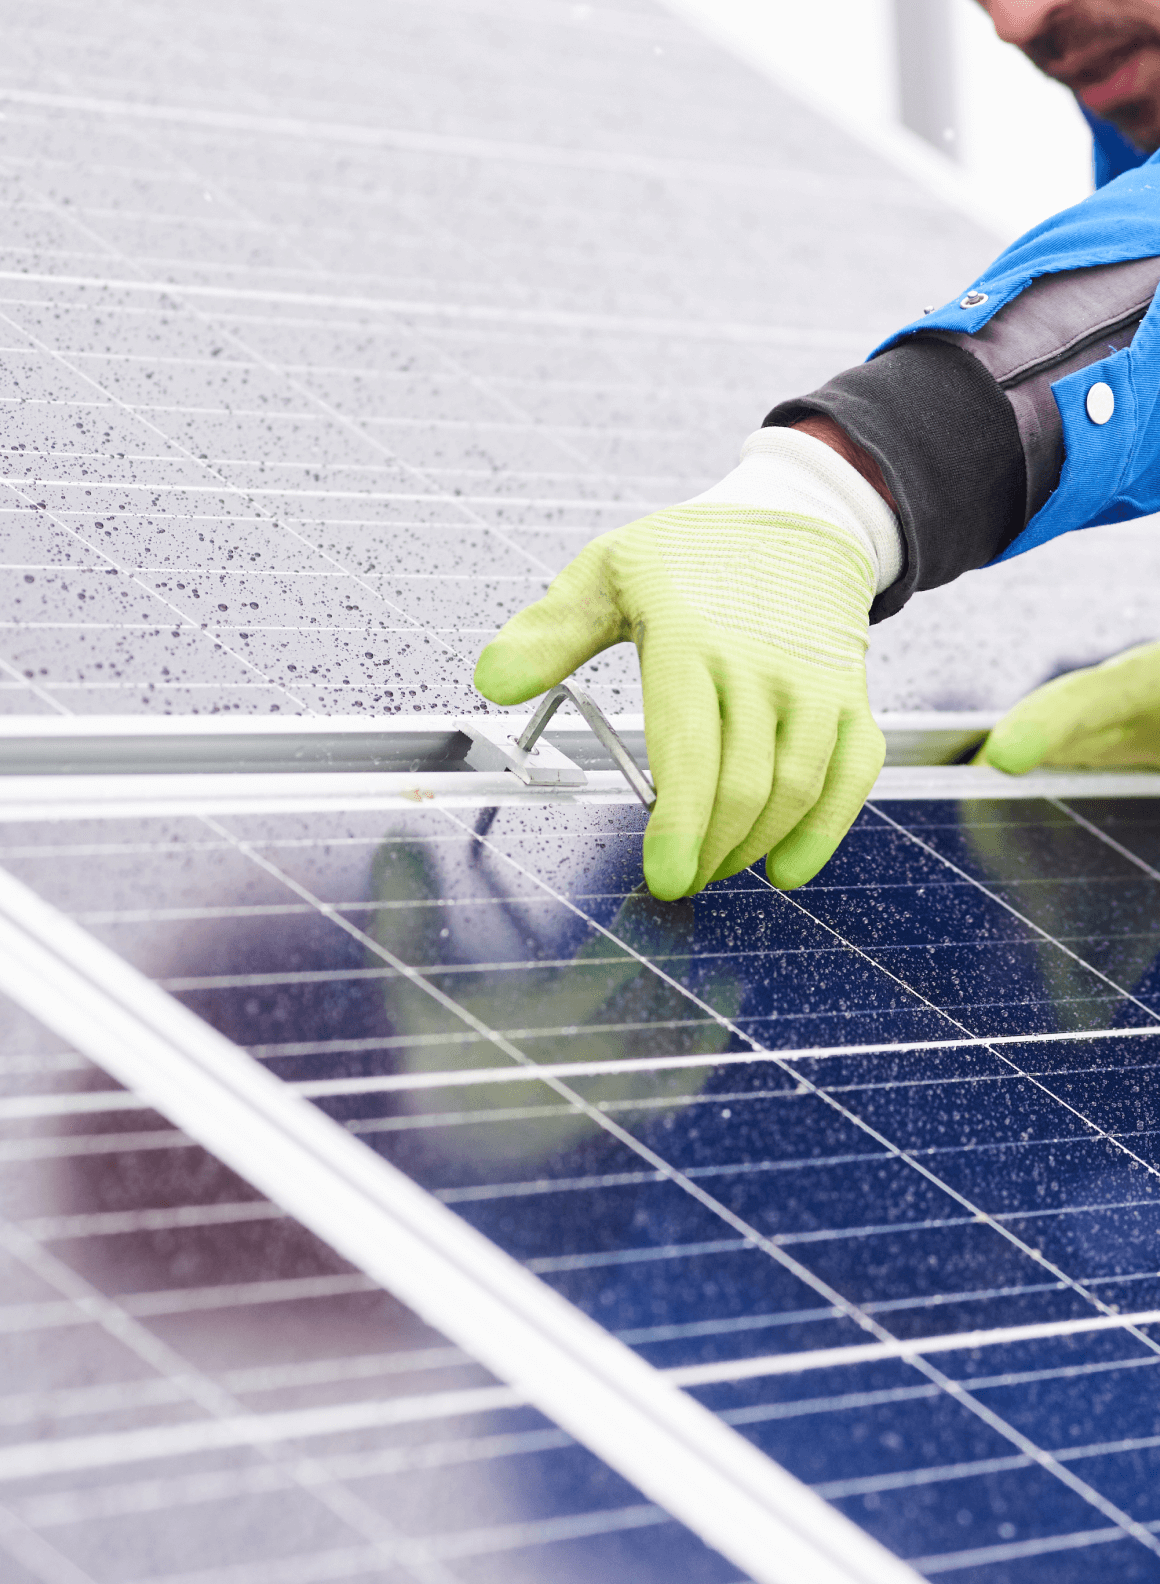 Ready to take down your photovoltaic panels ?